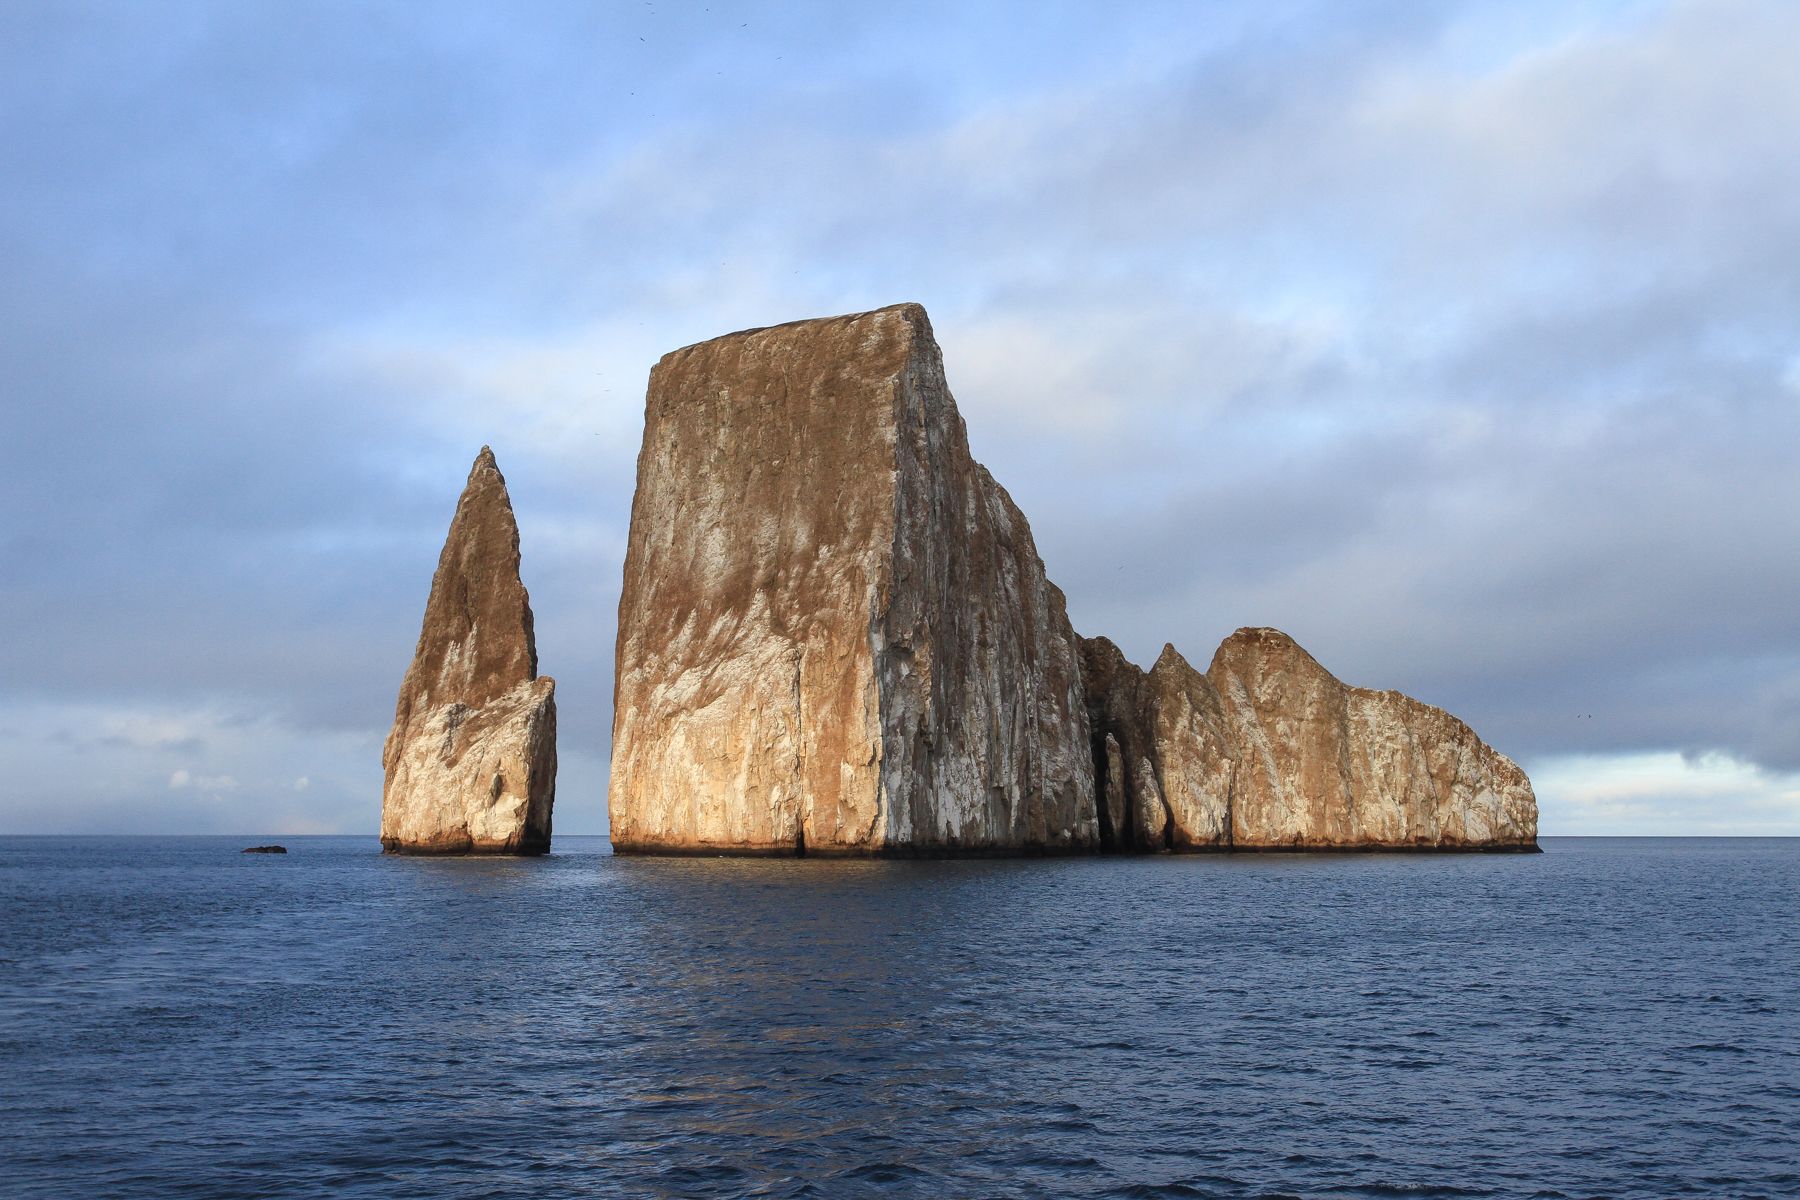 Of all the many scenic spots in the Galapagos, Kicker Rock is surely amongst the top five. You can even sail a large yacht down the narrow cleft between the rock stack and the main island!